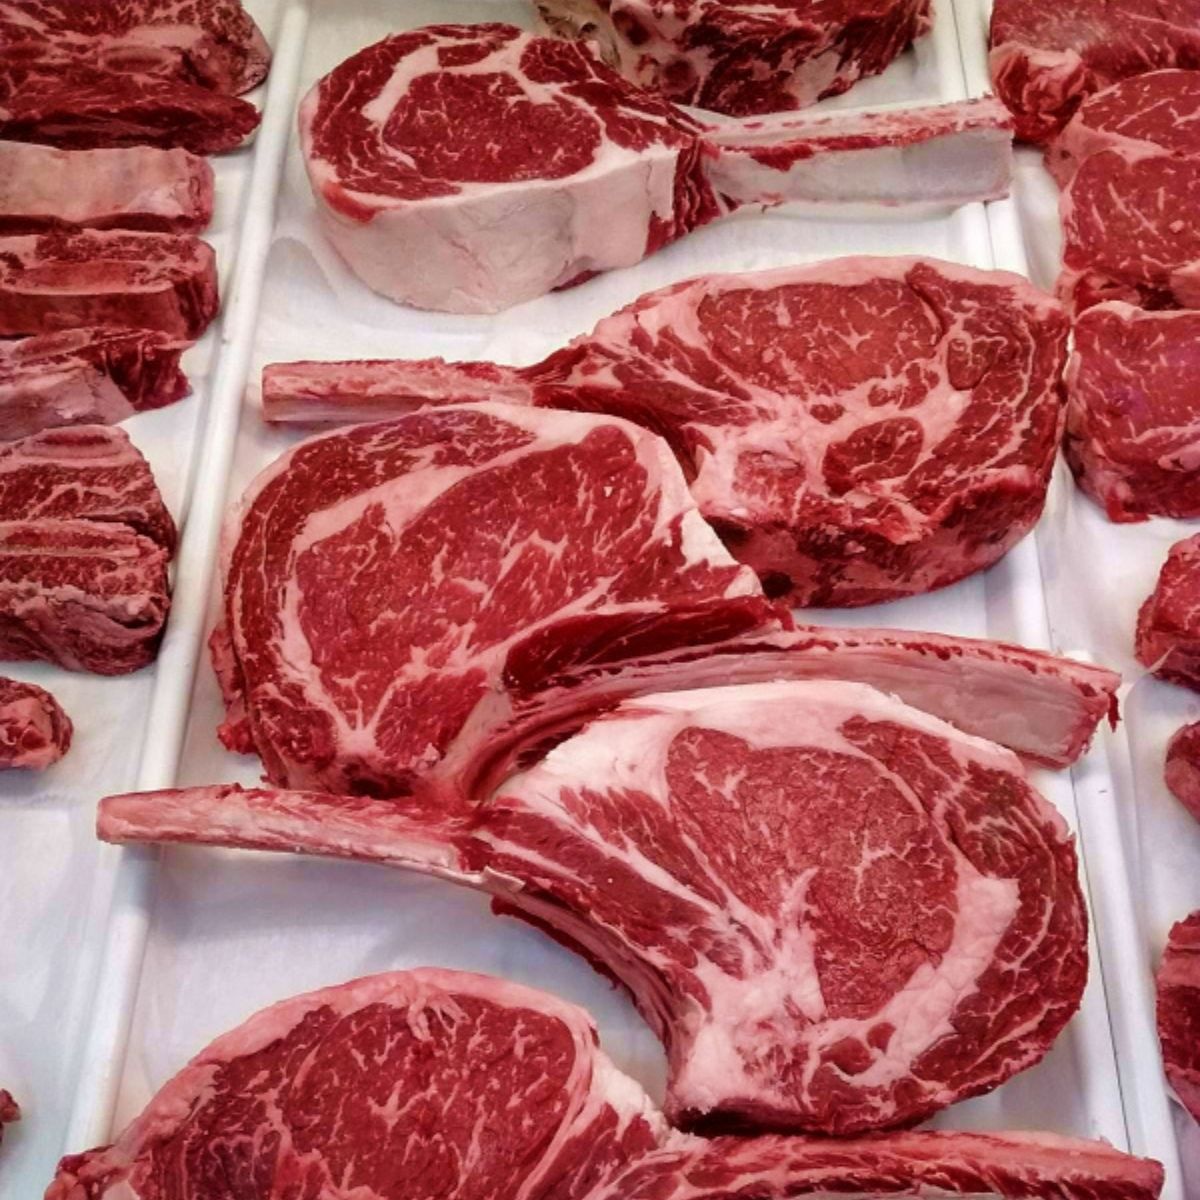 A display of Tomahawk ribeye steaks at a Costco store. The steaks are alerting with bone on the top or bone on the bottom in the display case.